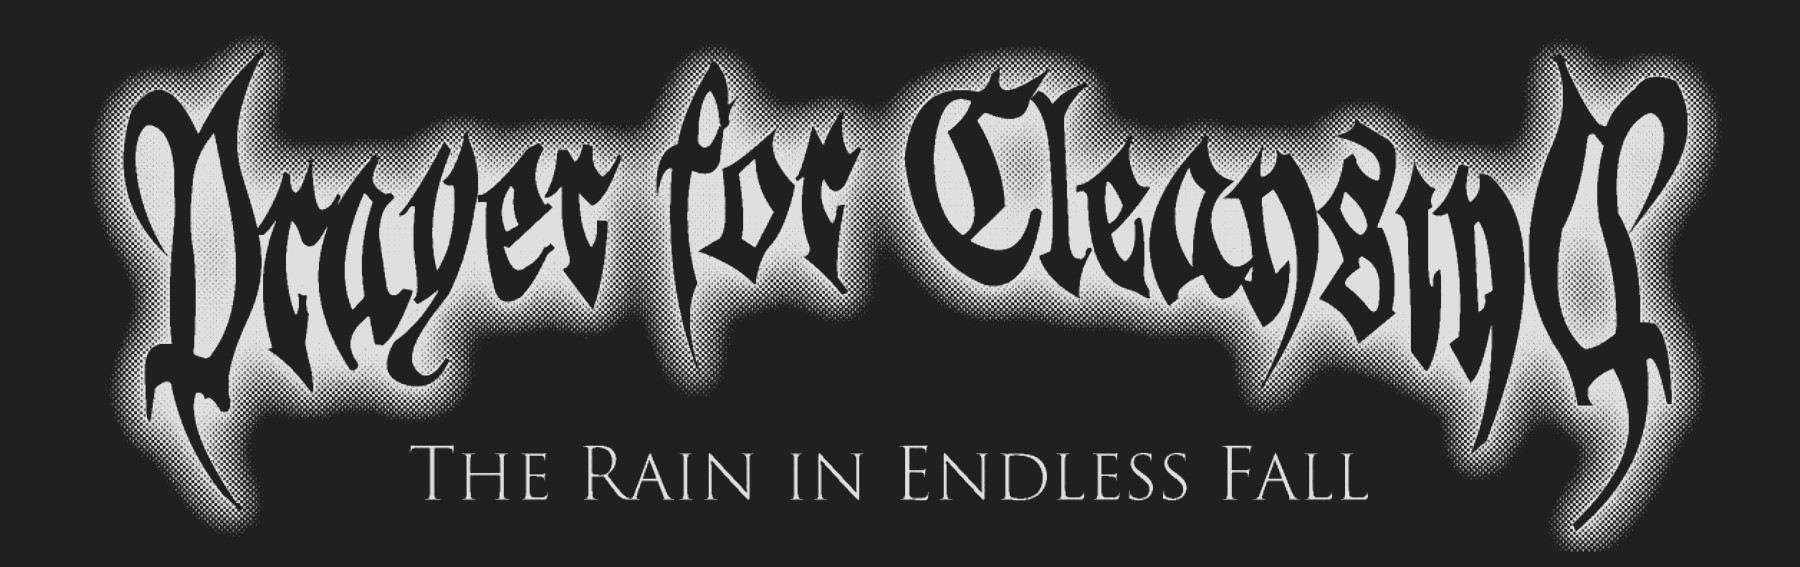 Prayer For Cleansing - The Rain In Endless Fal 8.5x2.75" sticker - Click Image to Close